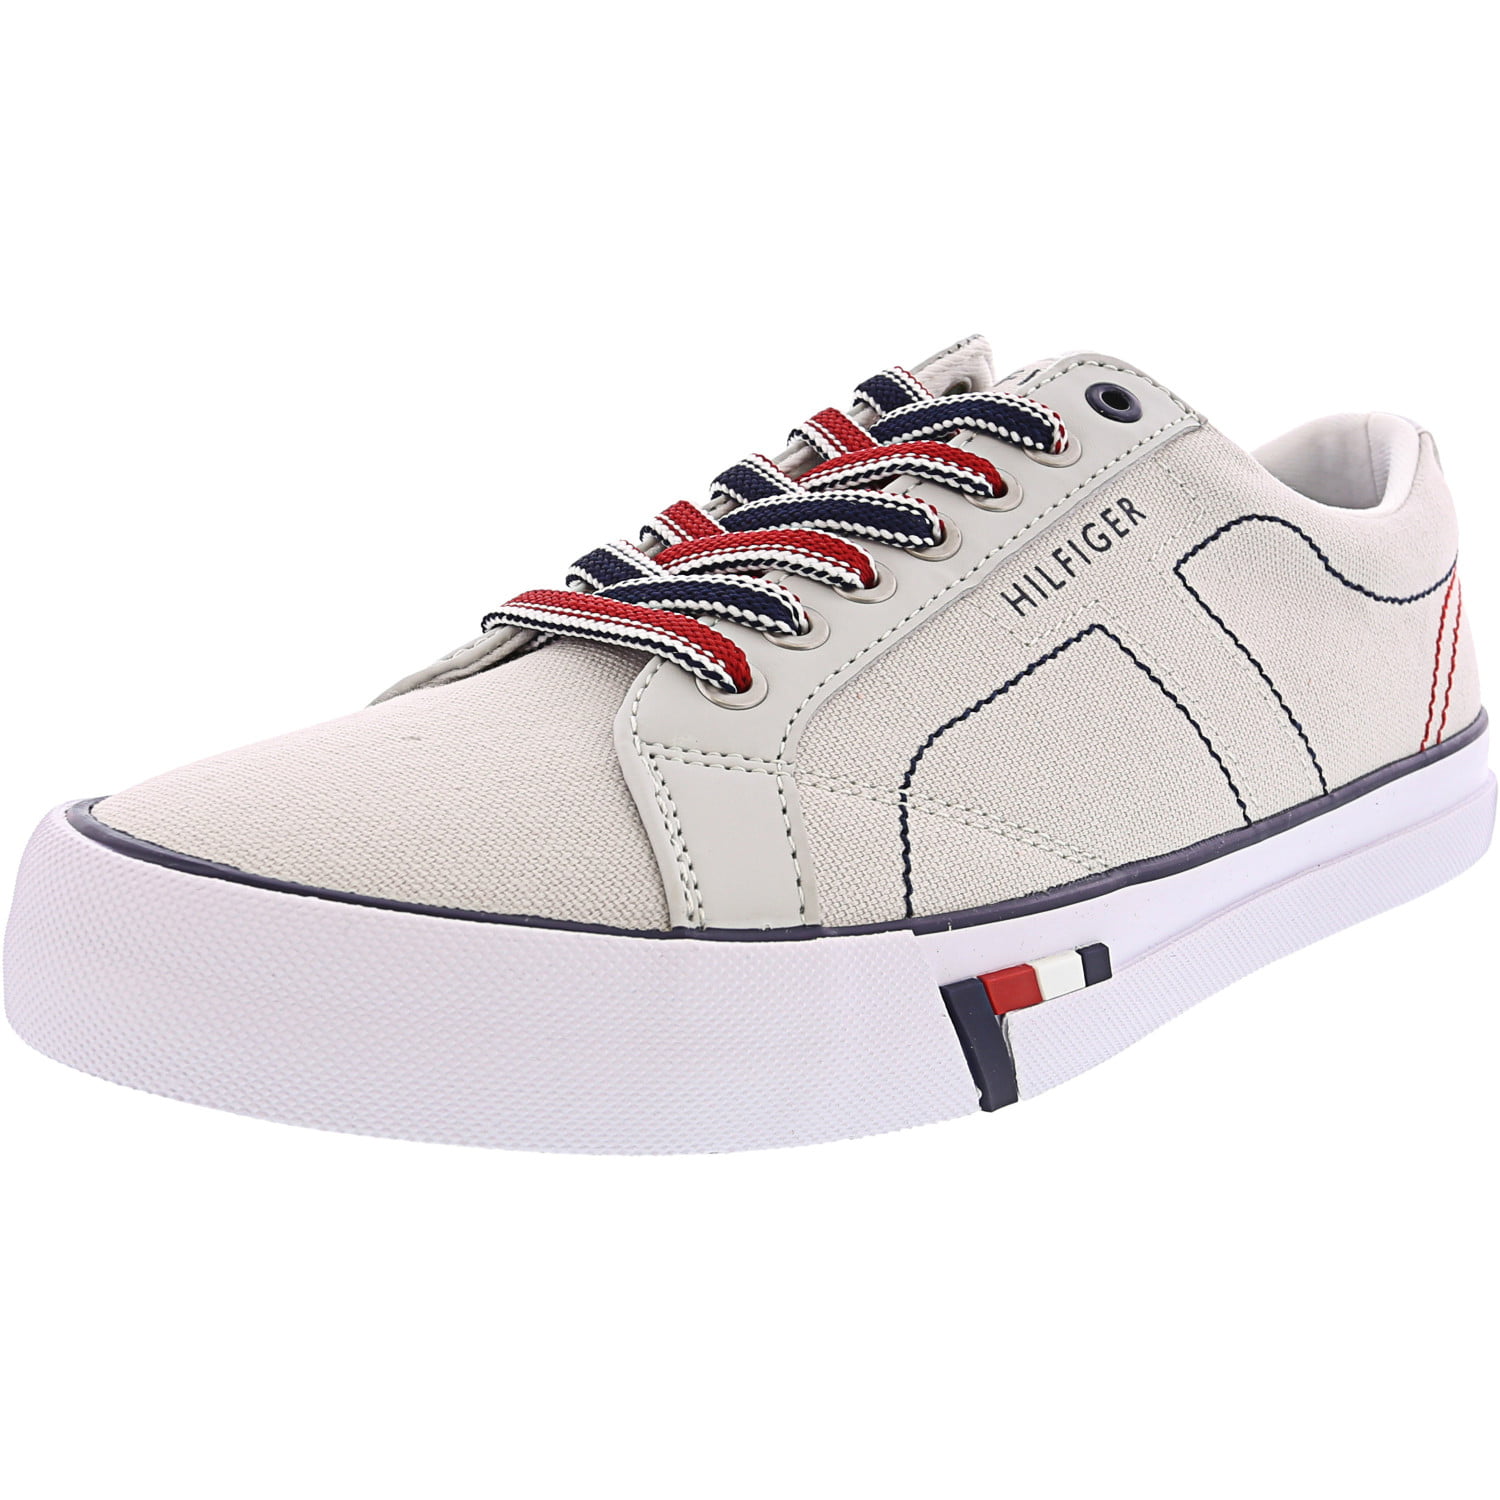 tommy hilfiger white canvas sneakers